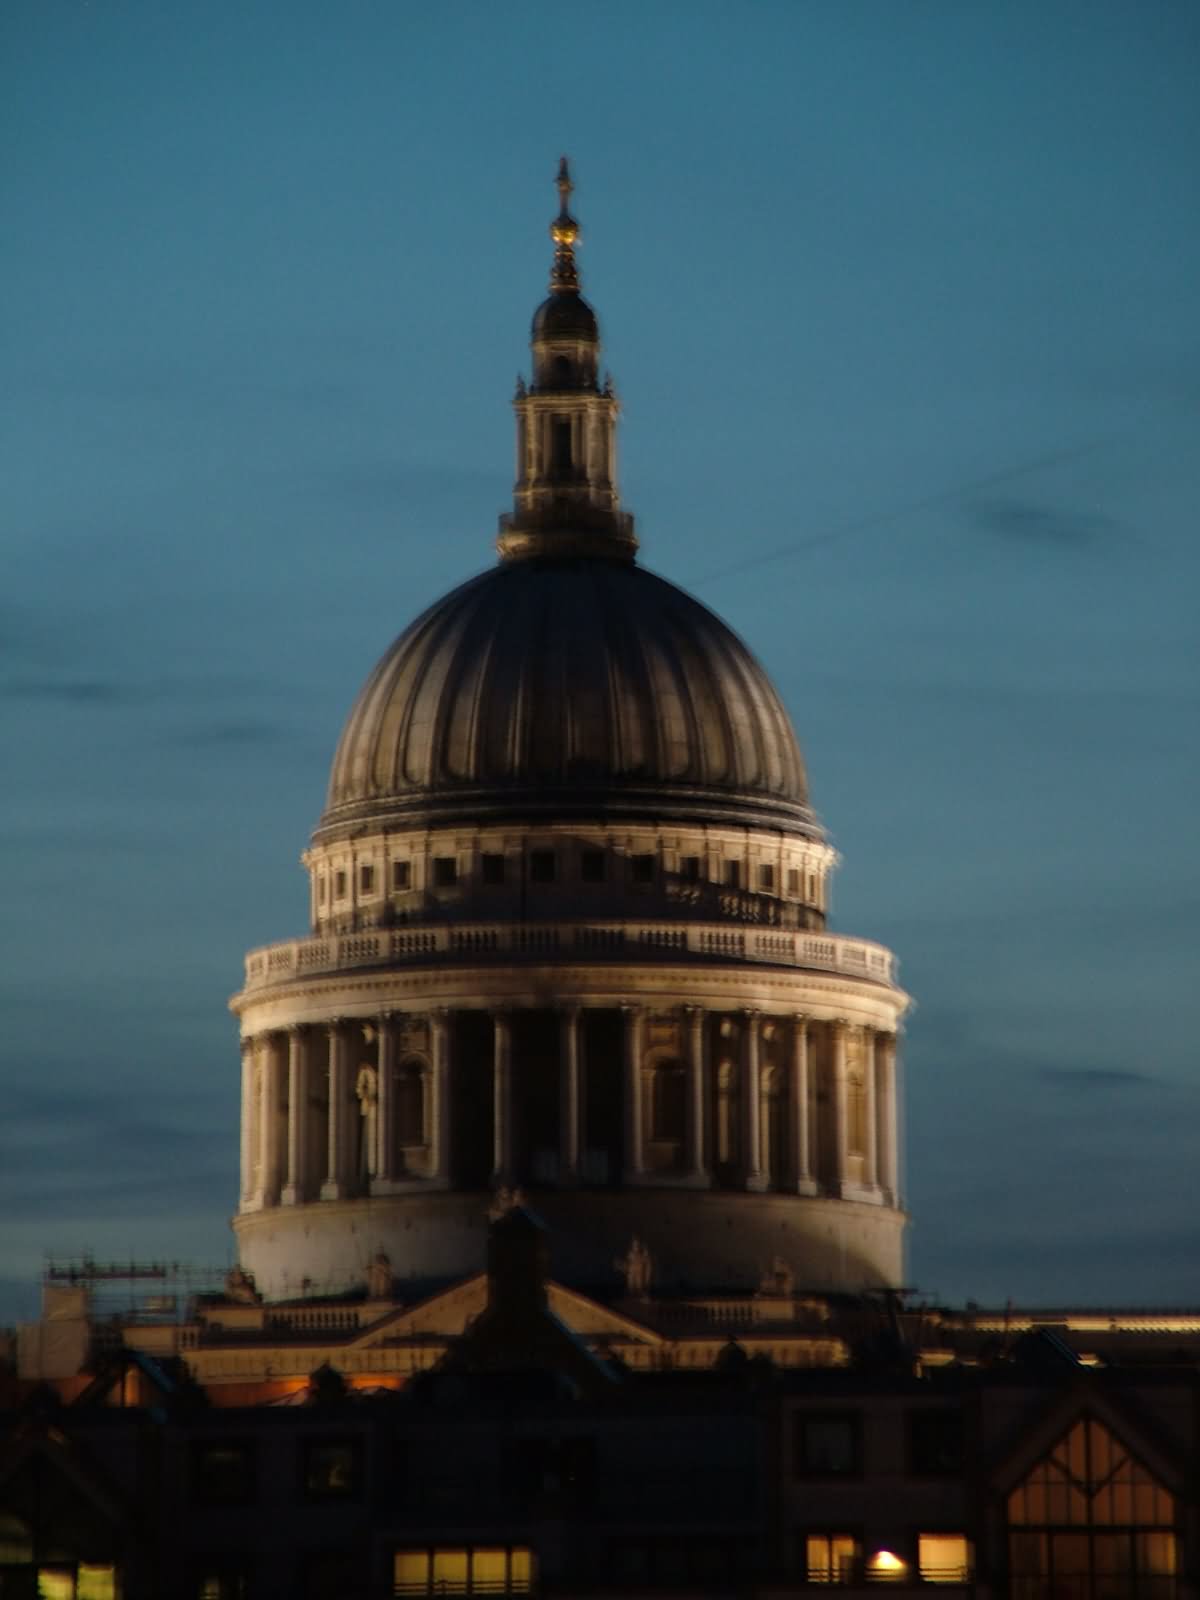 Beautiful Dome Of St Paul's Cathedral At Night